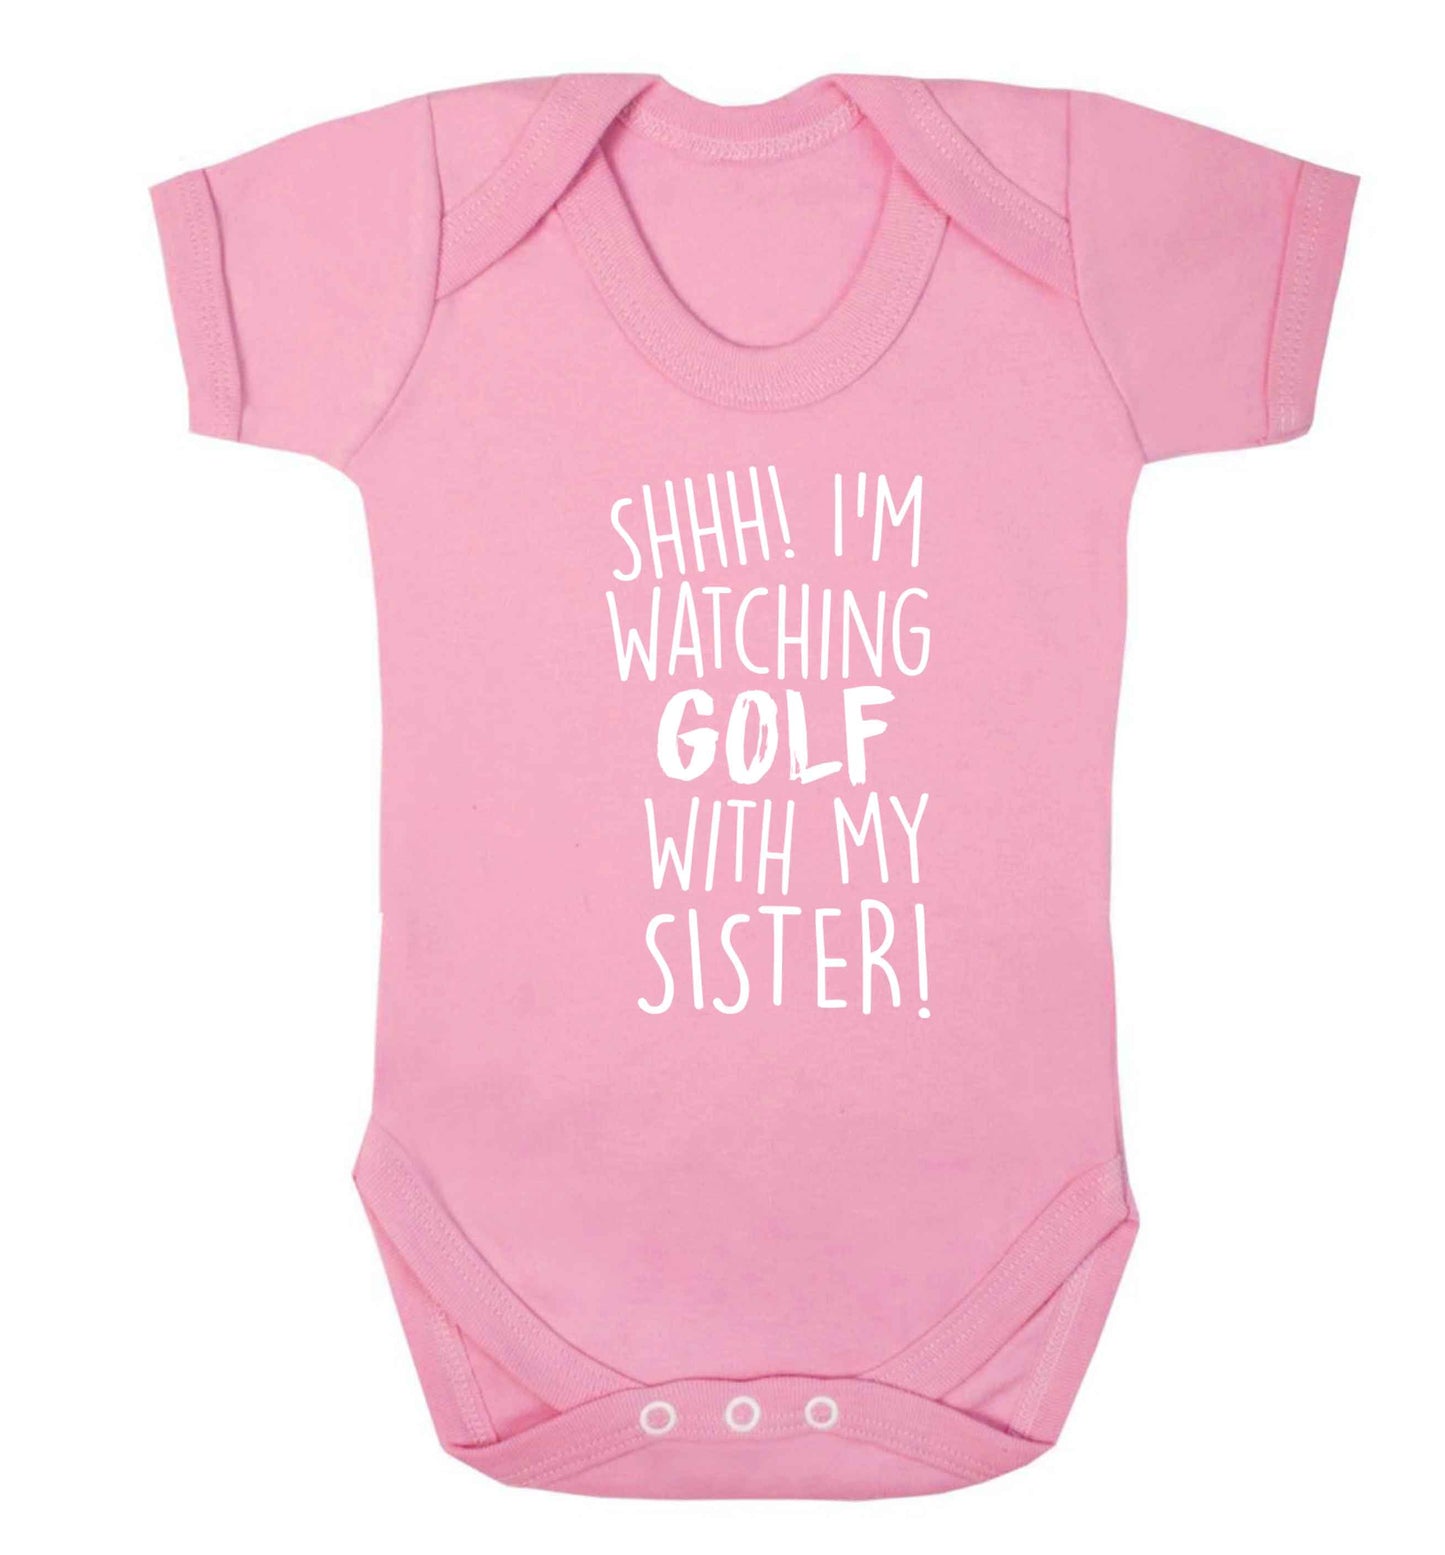 Shh I'm watching golf with my sister Baby Vest pale pink 18-24 months